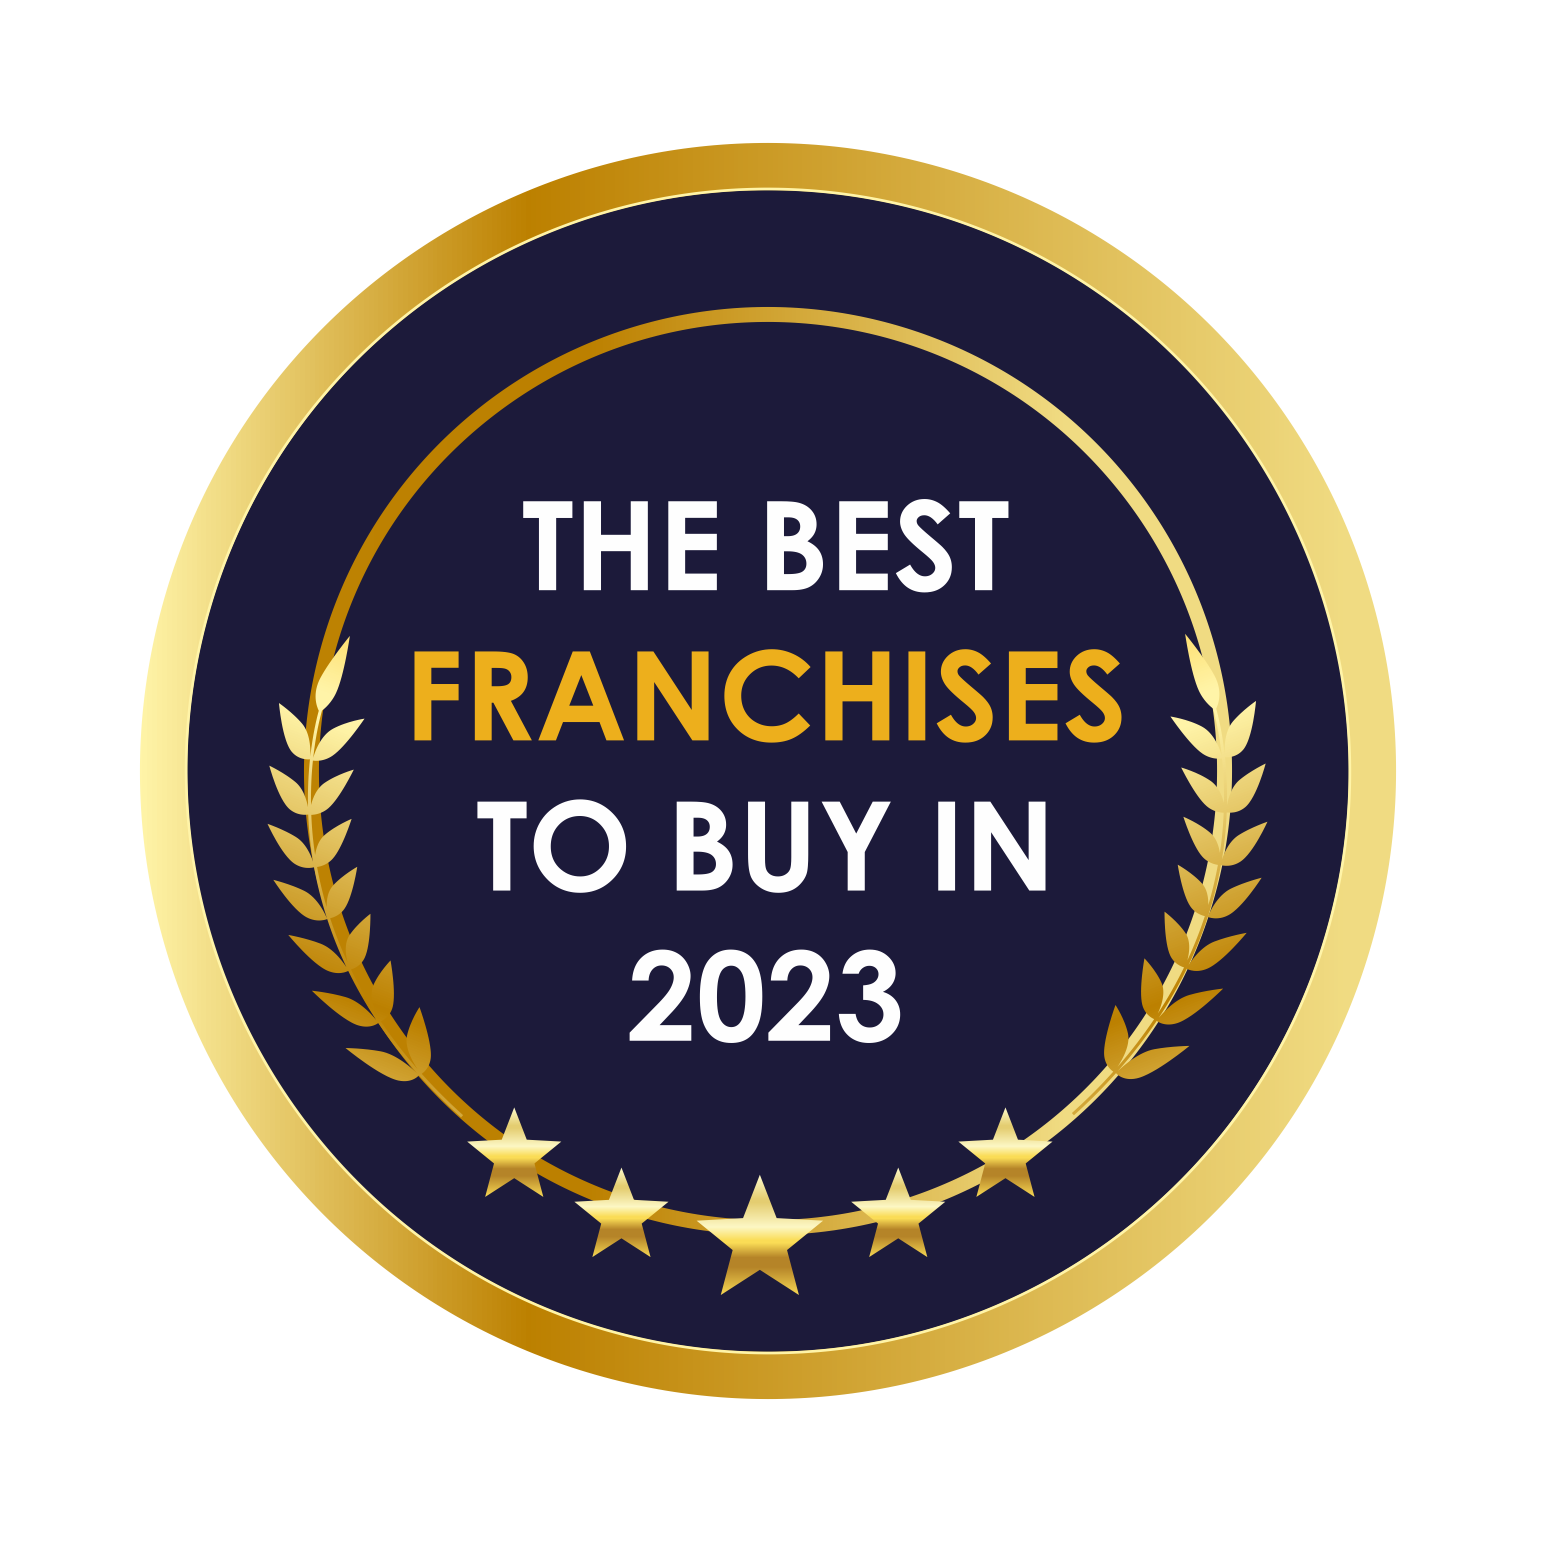 Grand Welcome named to The Best Franchises to Buy in 2023 by The Enterprise Magazine